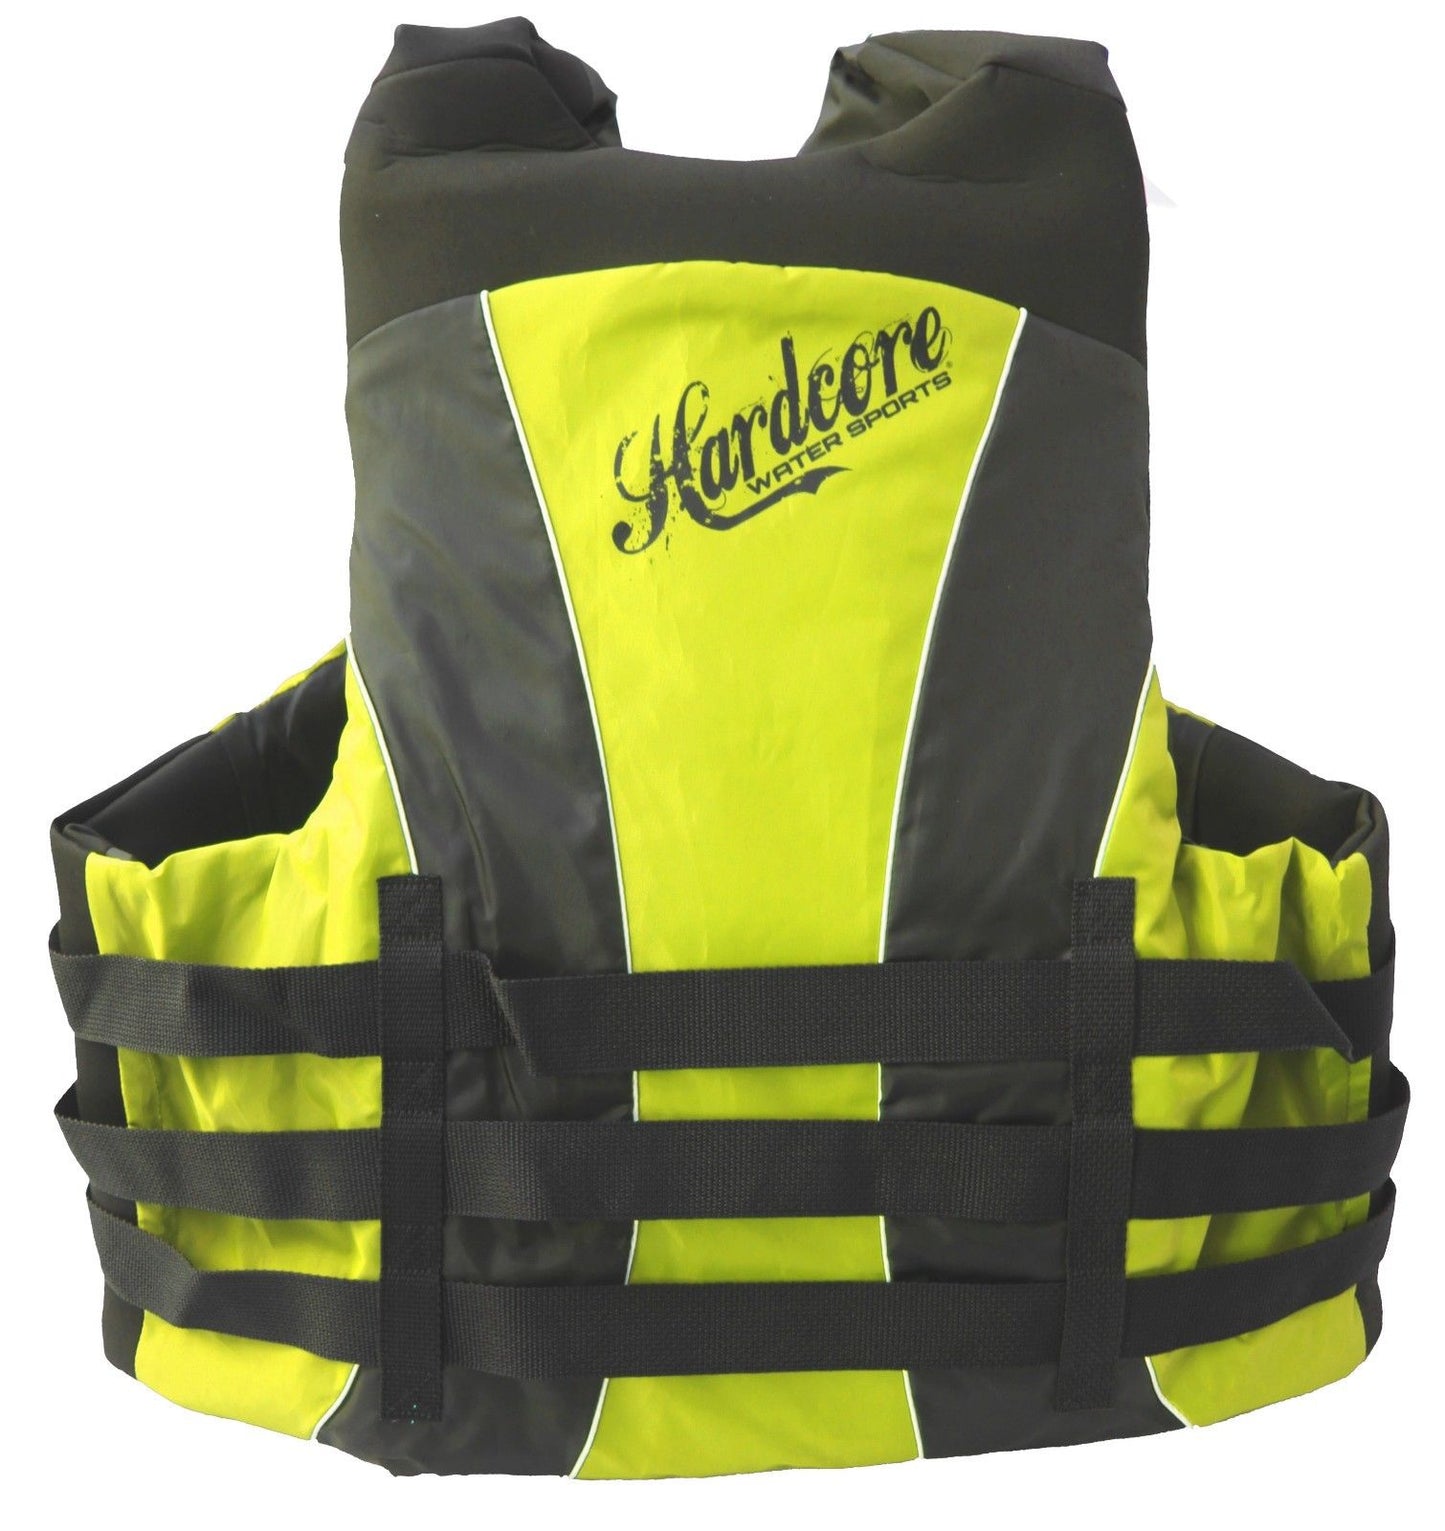 Fully Enclosed Neoprene and Polyester Life Jacket Vest